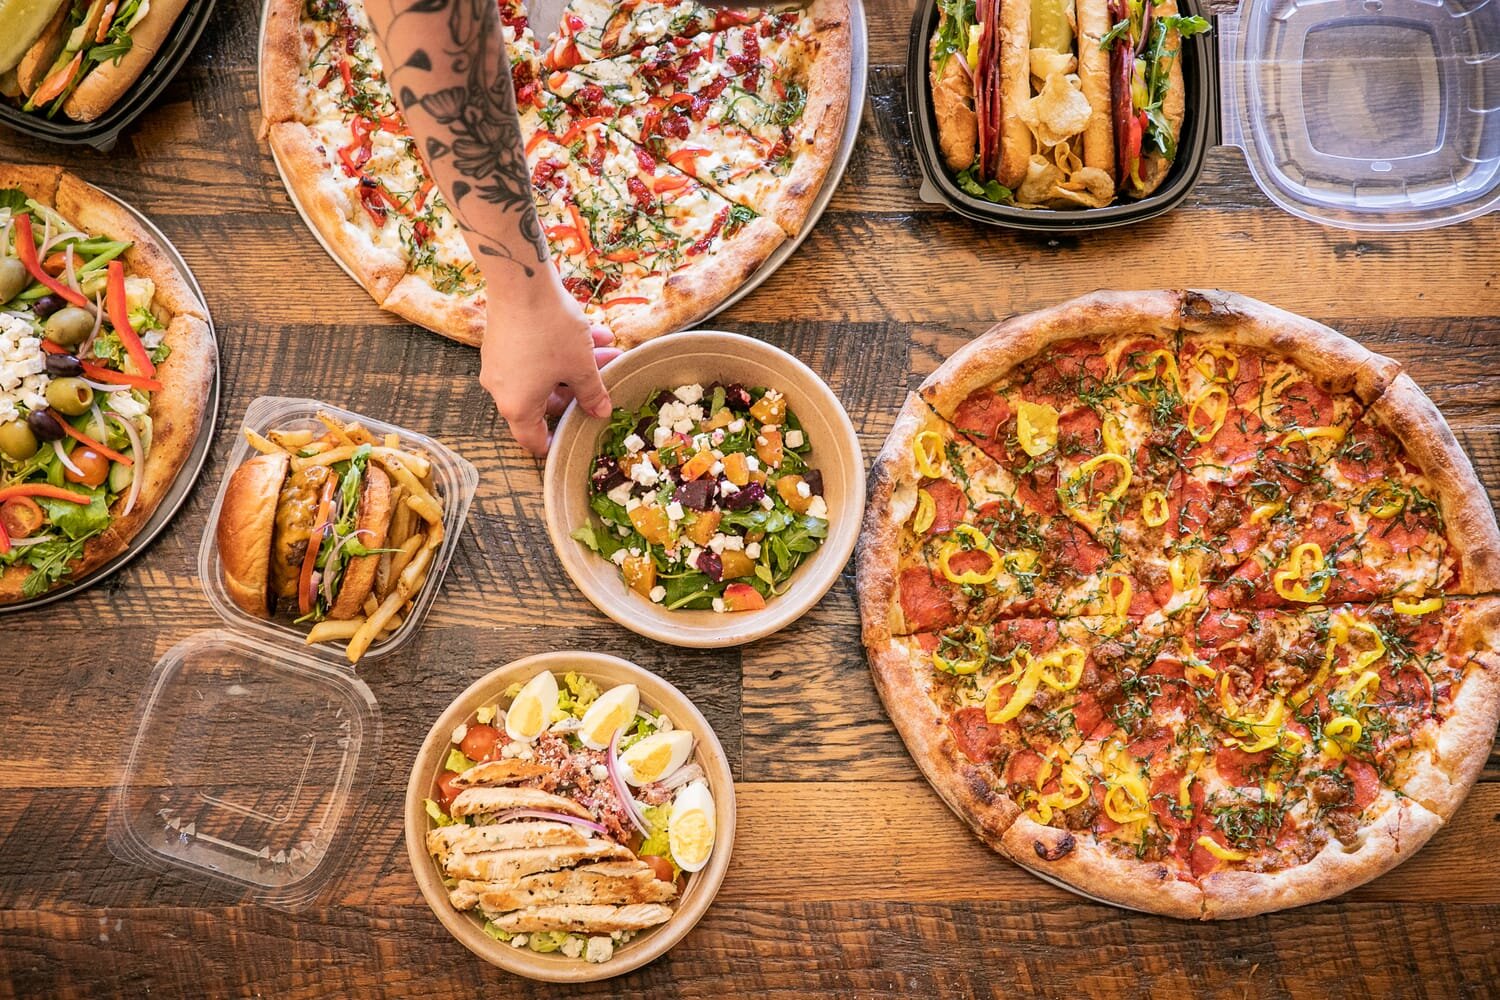 spread of pizza, salads, and burgers